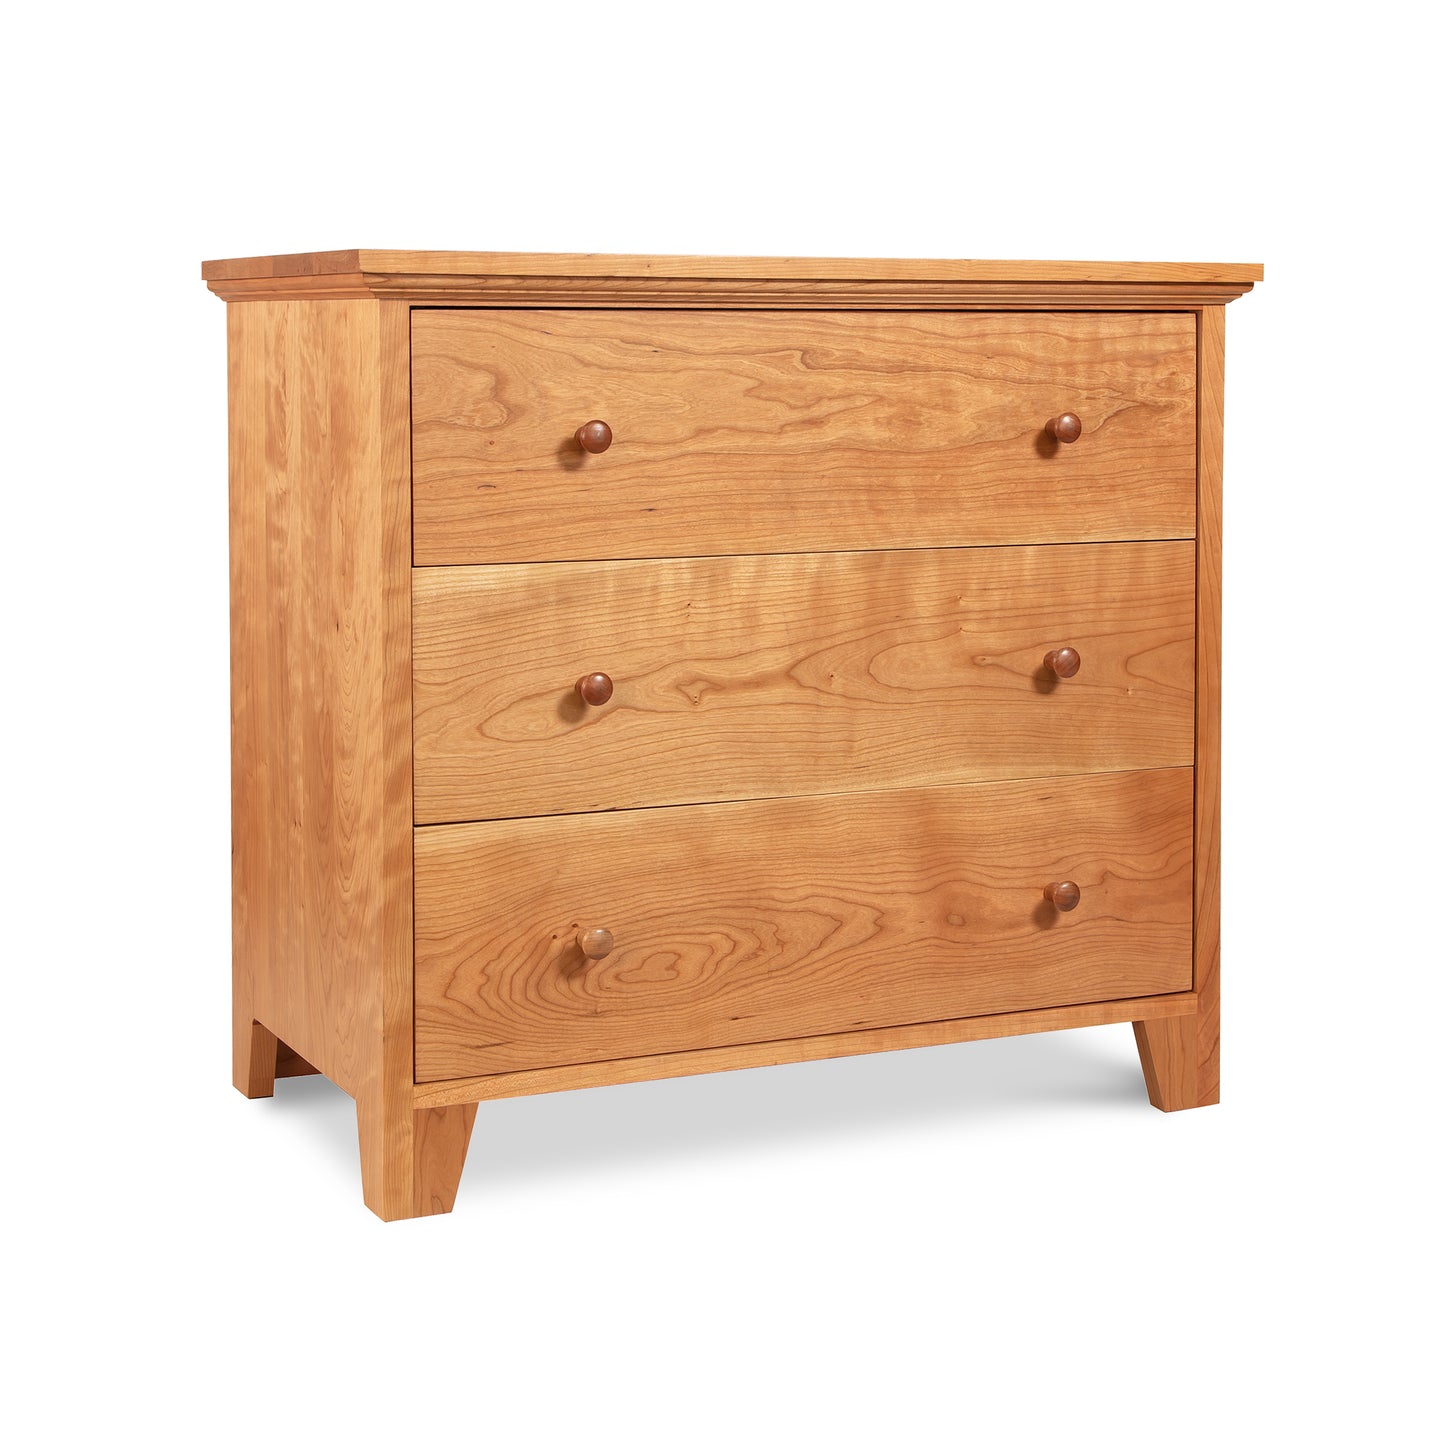 A Lyndon Furniture American Country 3-Drawer Chest, handmade in Vermont, displayed on a white background.